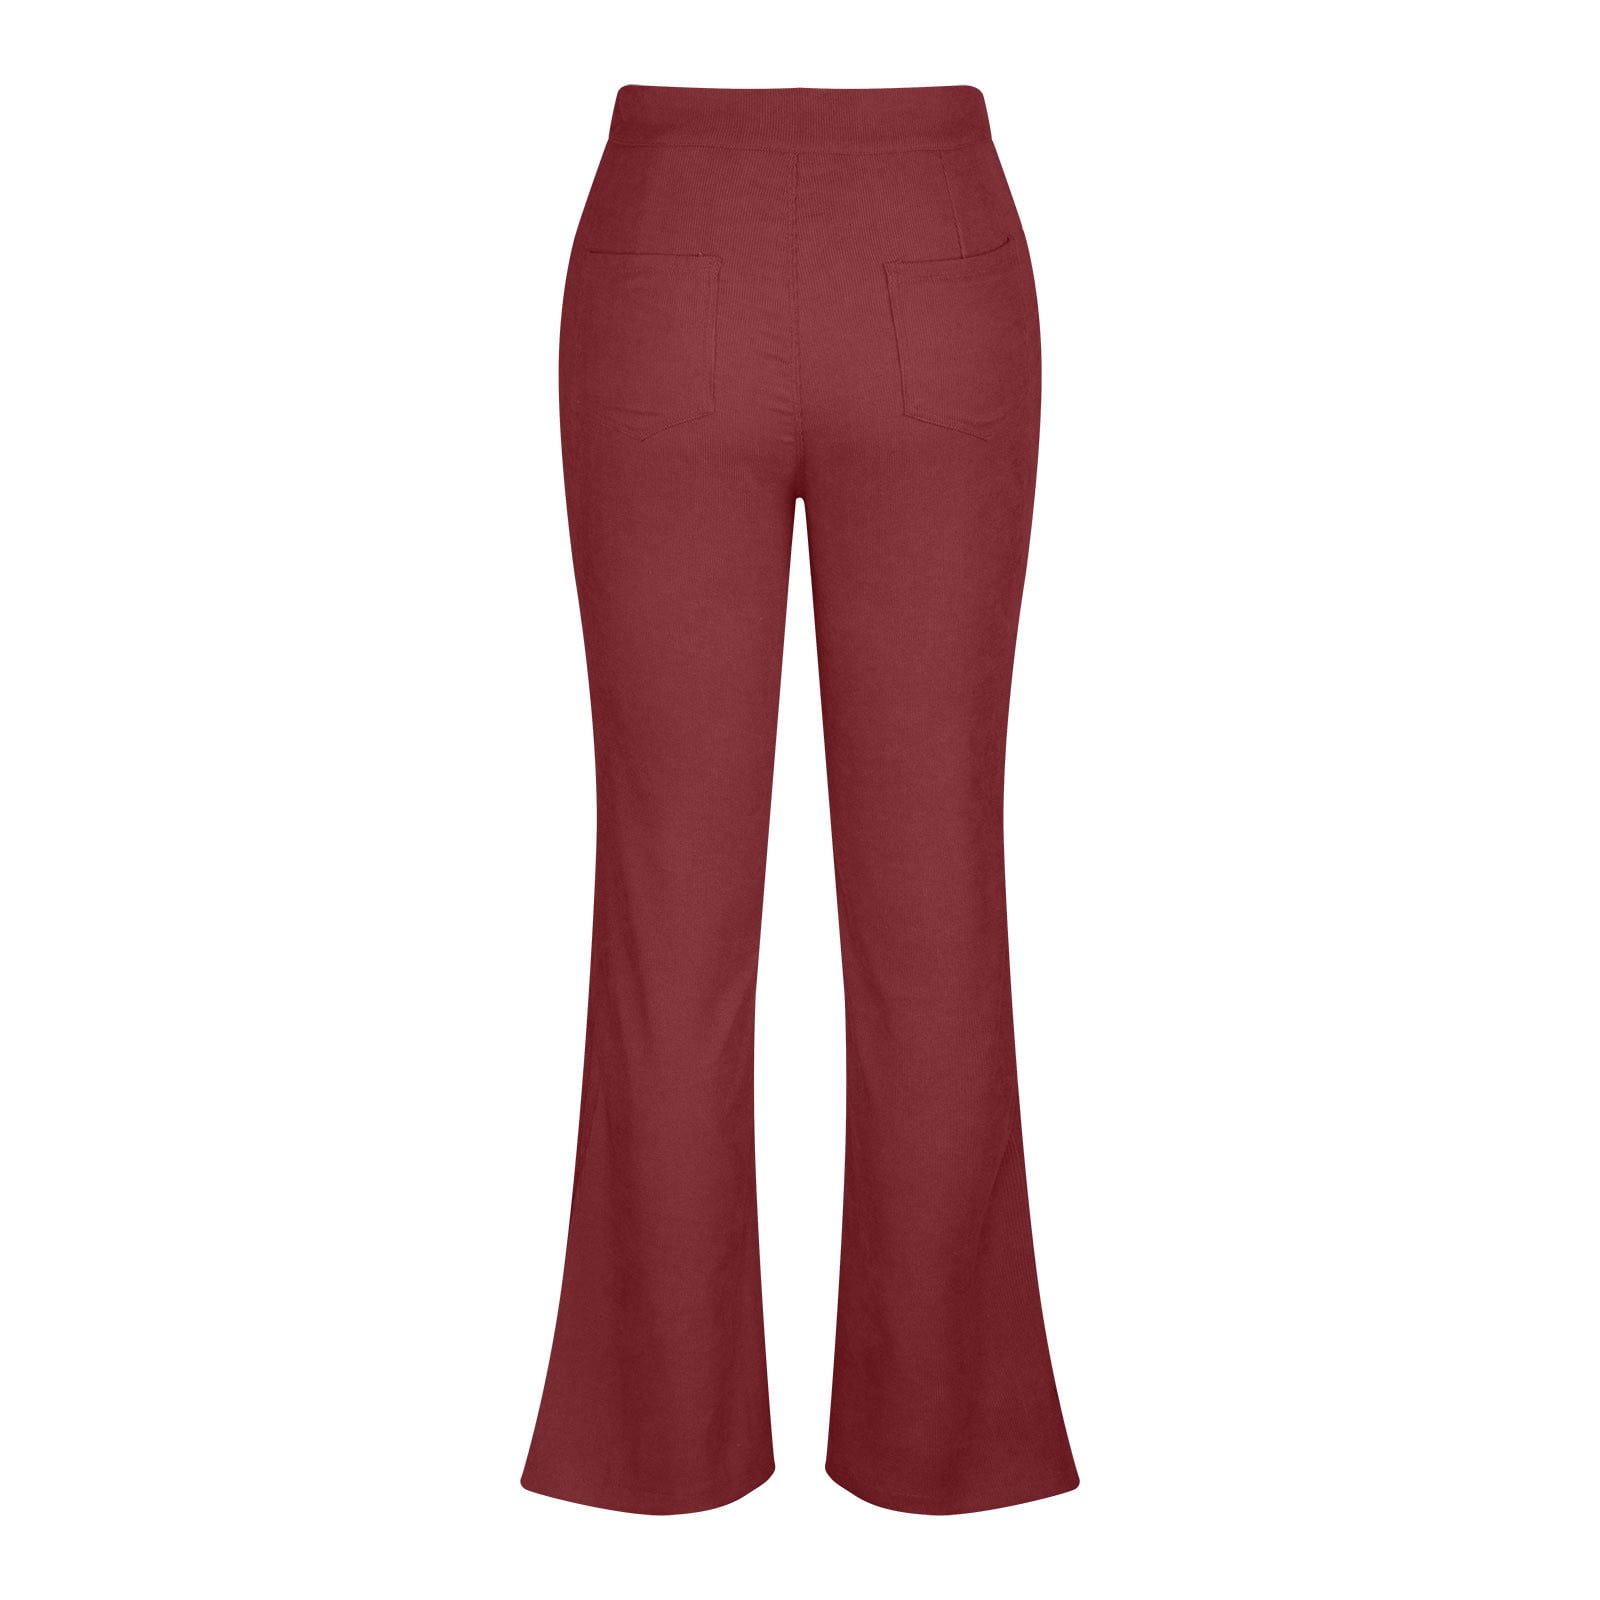 XFLWAM Women's High Waist Flare Pants Casual Wide Leg Bell Bottom Leggings  Solid Color Plus Size Long Trousers with Pockets Wine Red M 